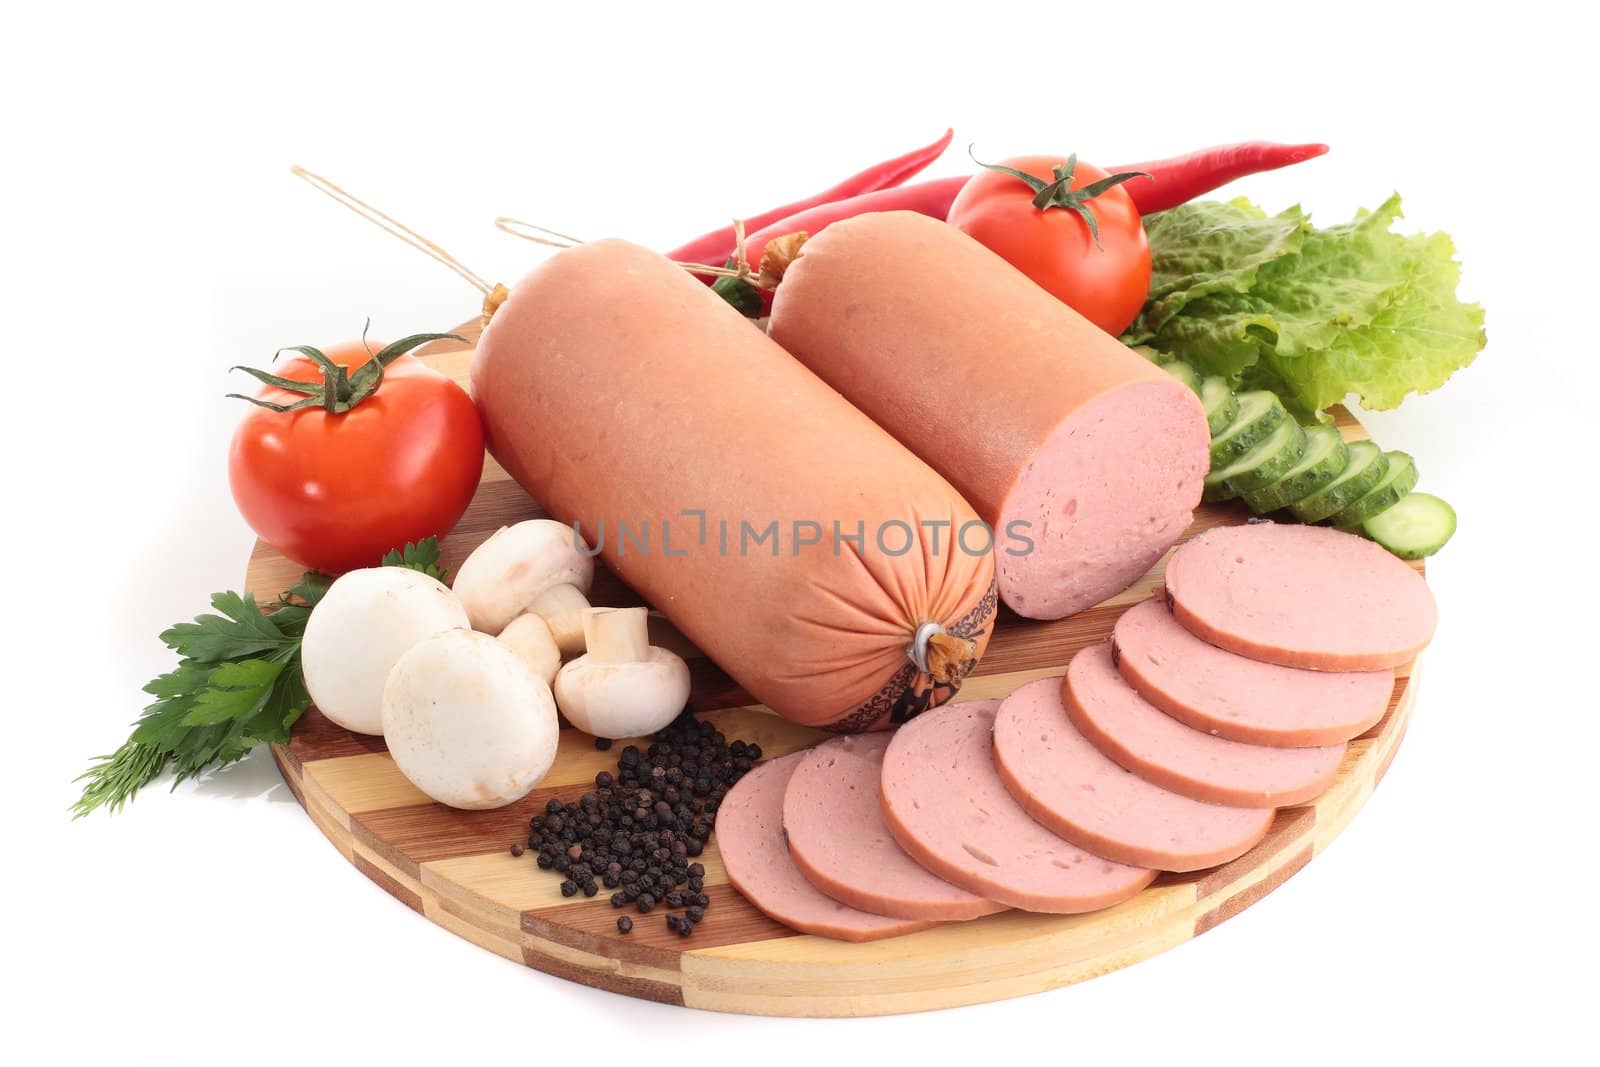 sausage on plate with vegetables by shutswis